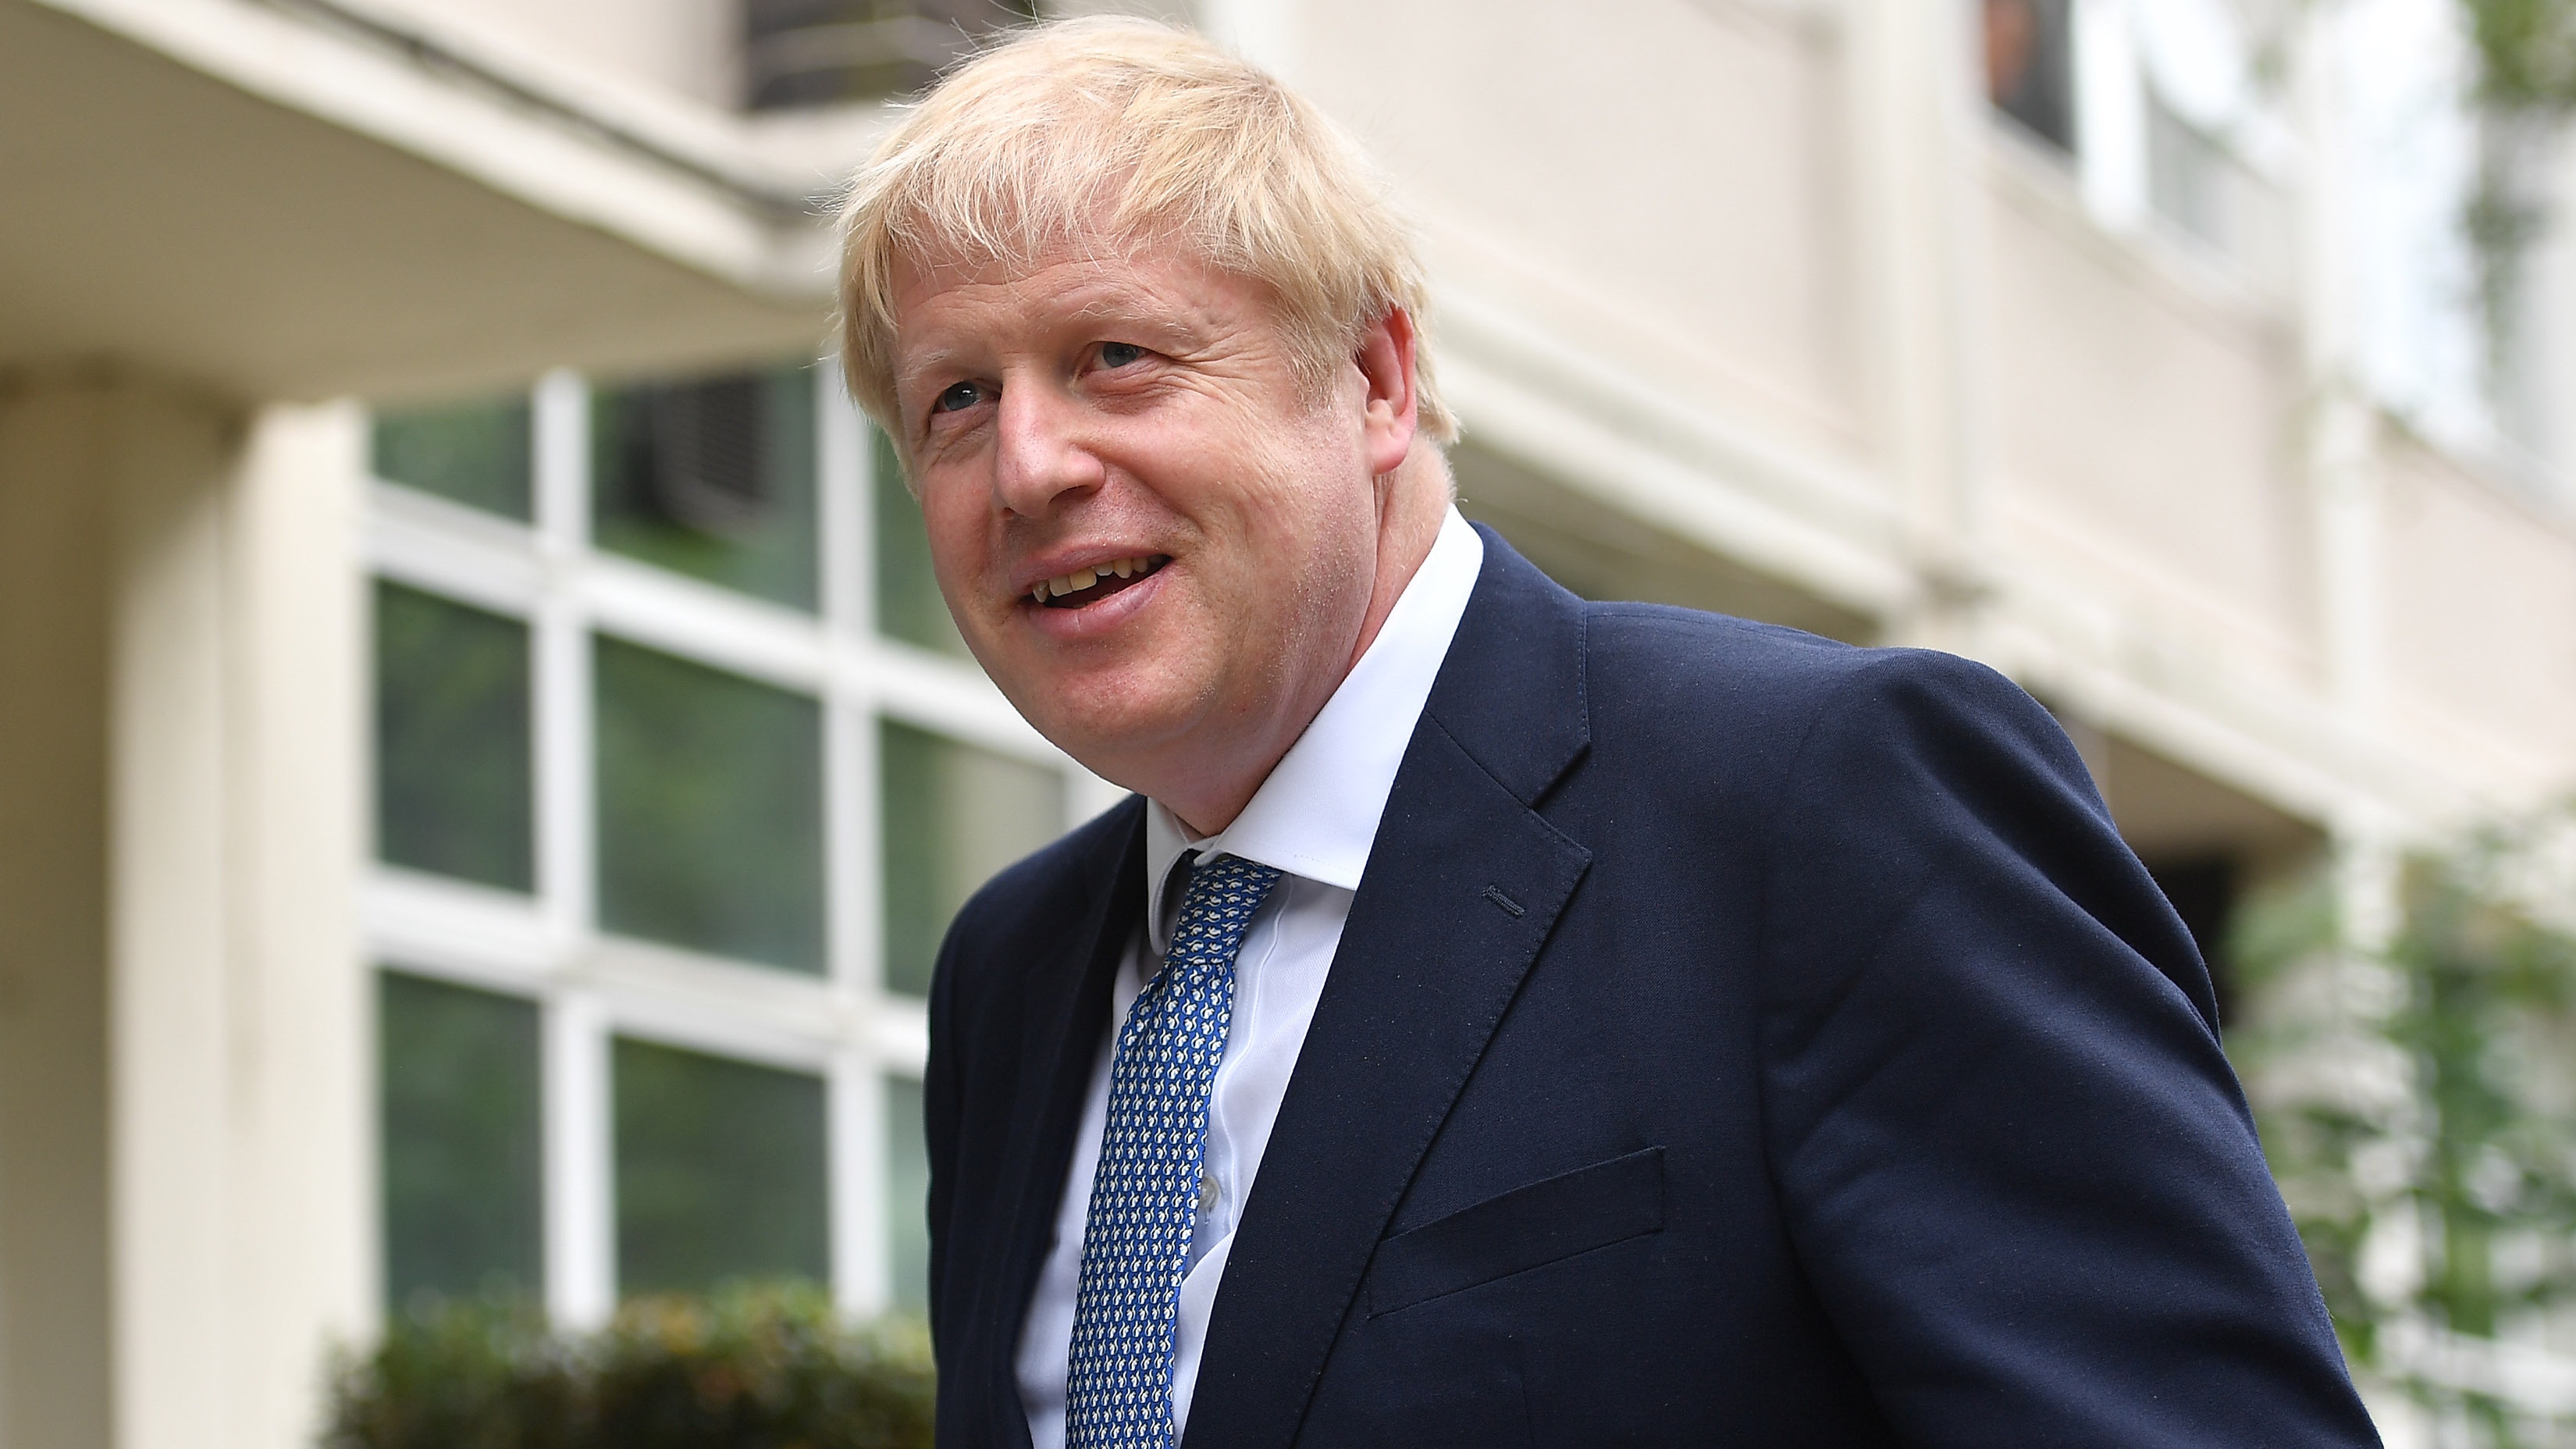 Prime Minister Boris Johnson rules out election before October 31